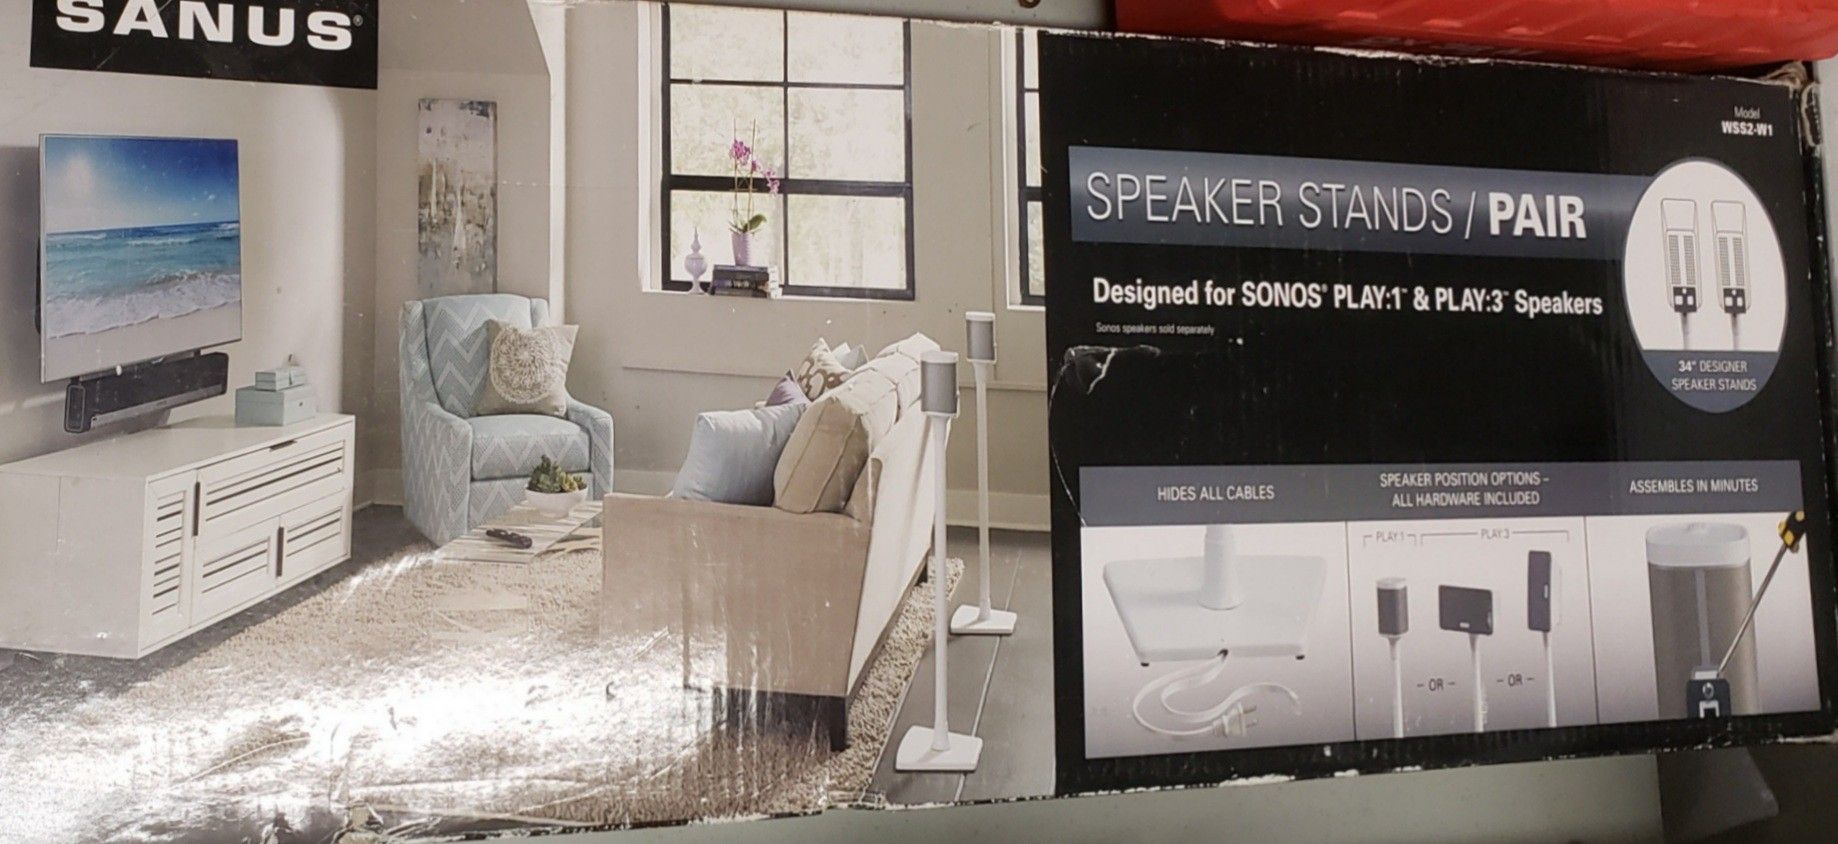 Sanus Wireless Speaker Stands for Sonos ONE, PLAY:1, and PLAY:3 - Pair (White)